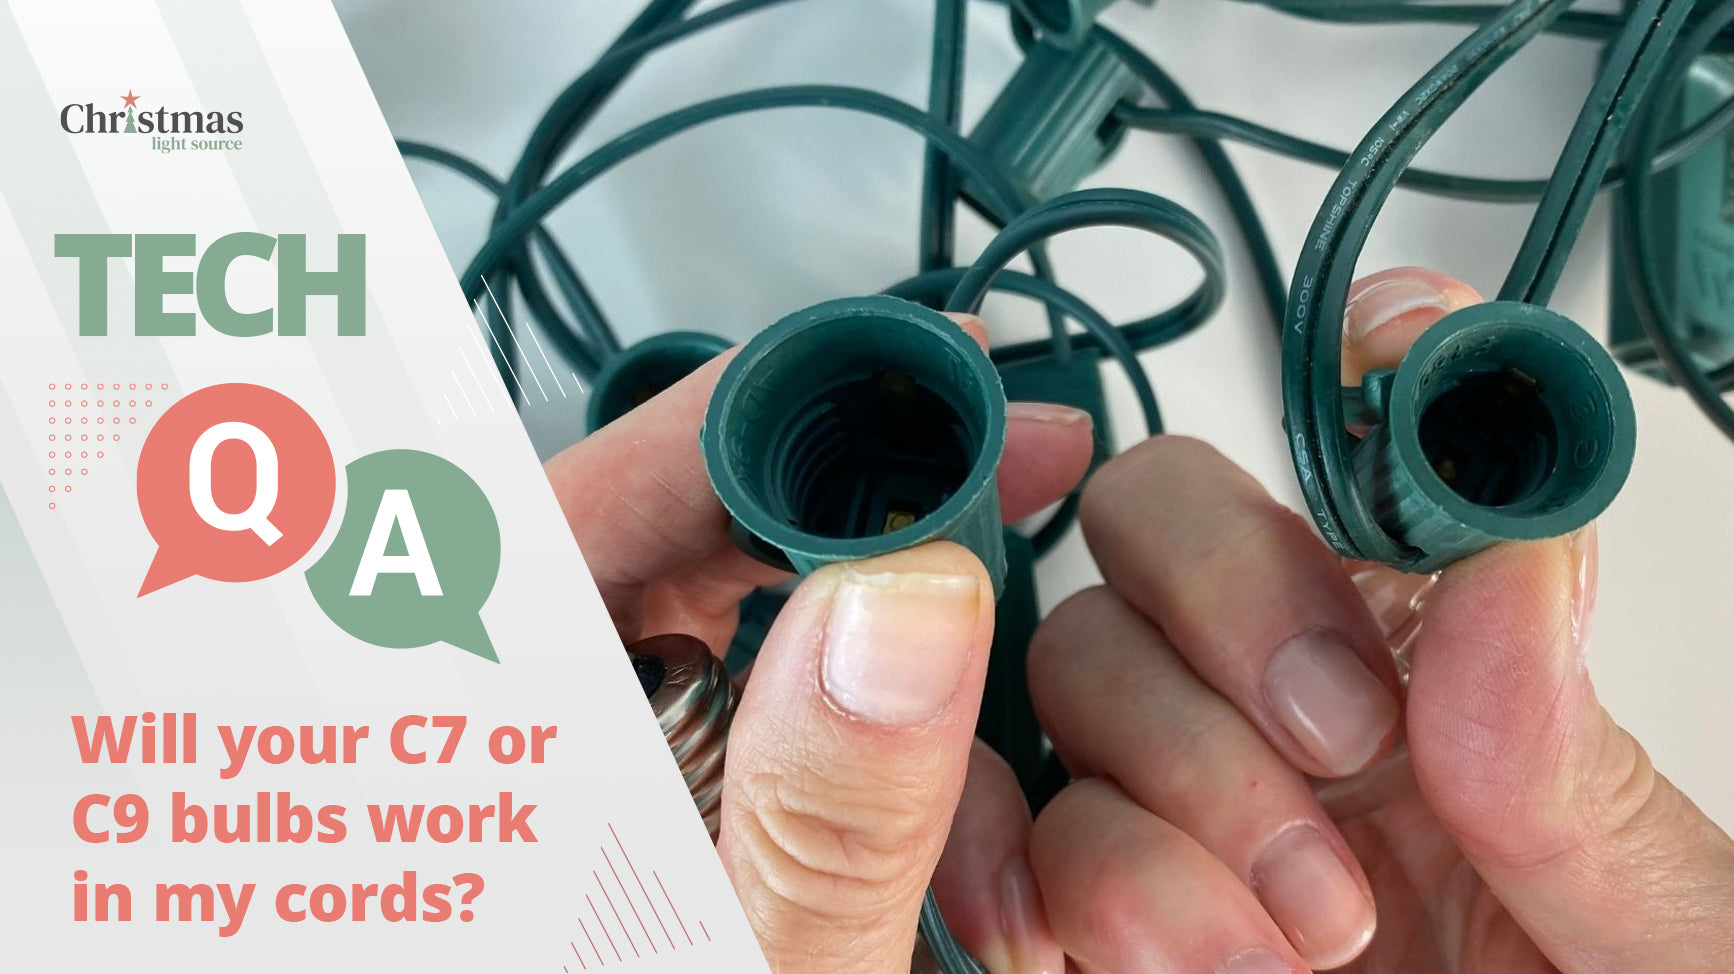 Will your C7 or C9 bulbs work in my cords?